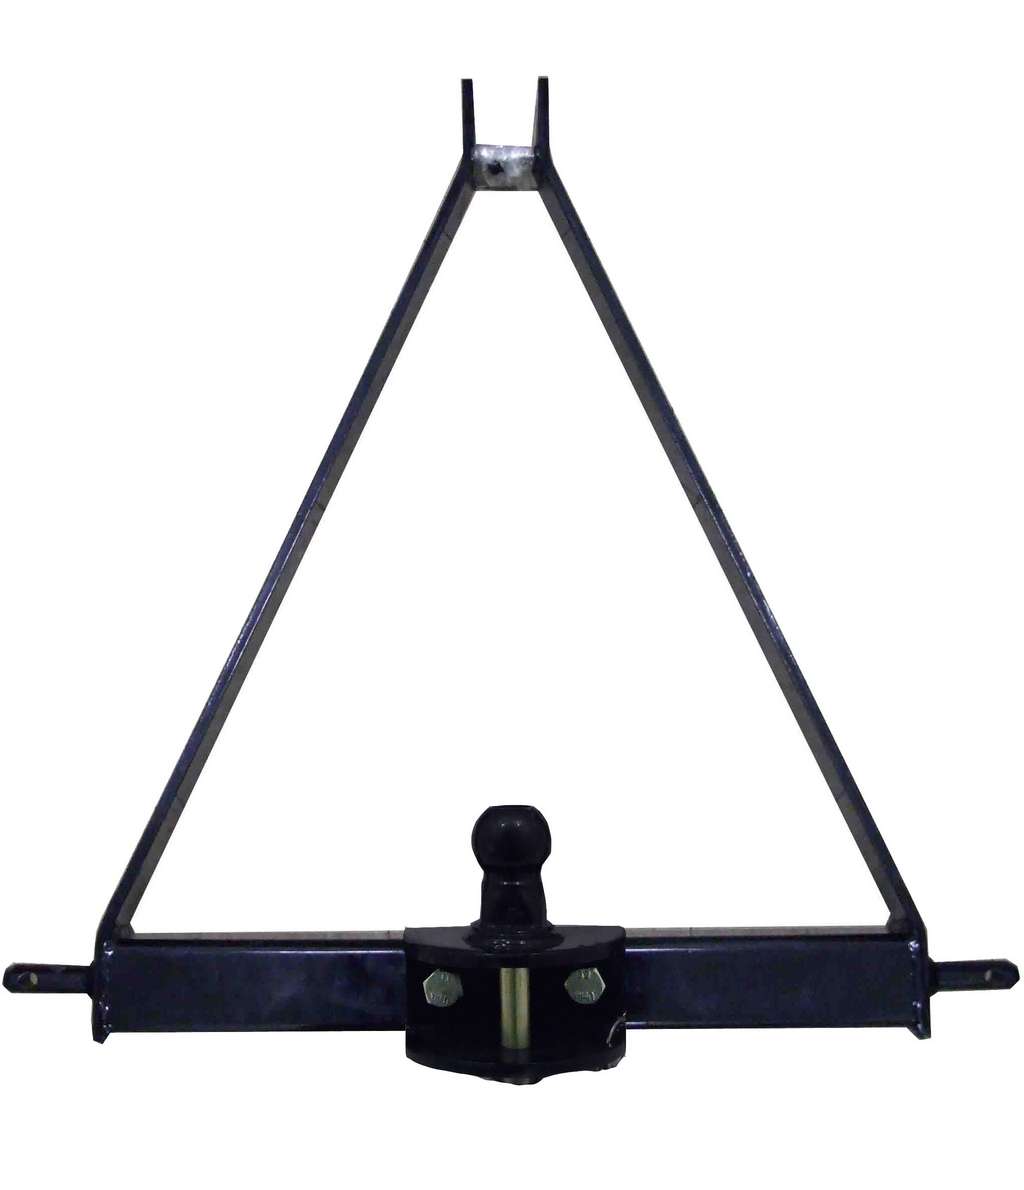 A Frame 3 Point Tow Hitch For Small Tractor Mounted Towing Cat 1 Ball & Pin